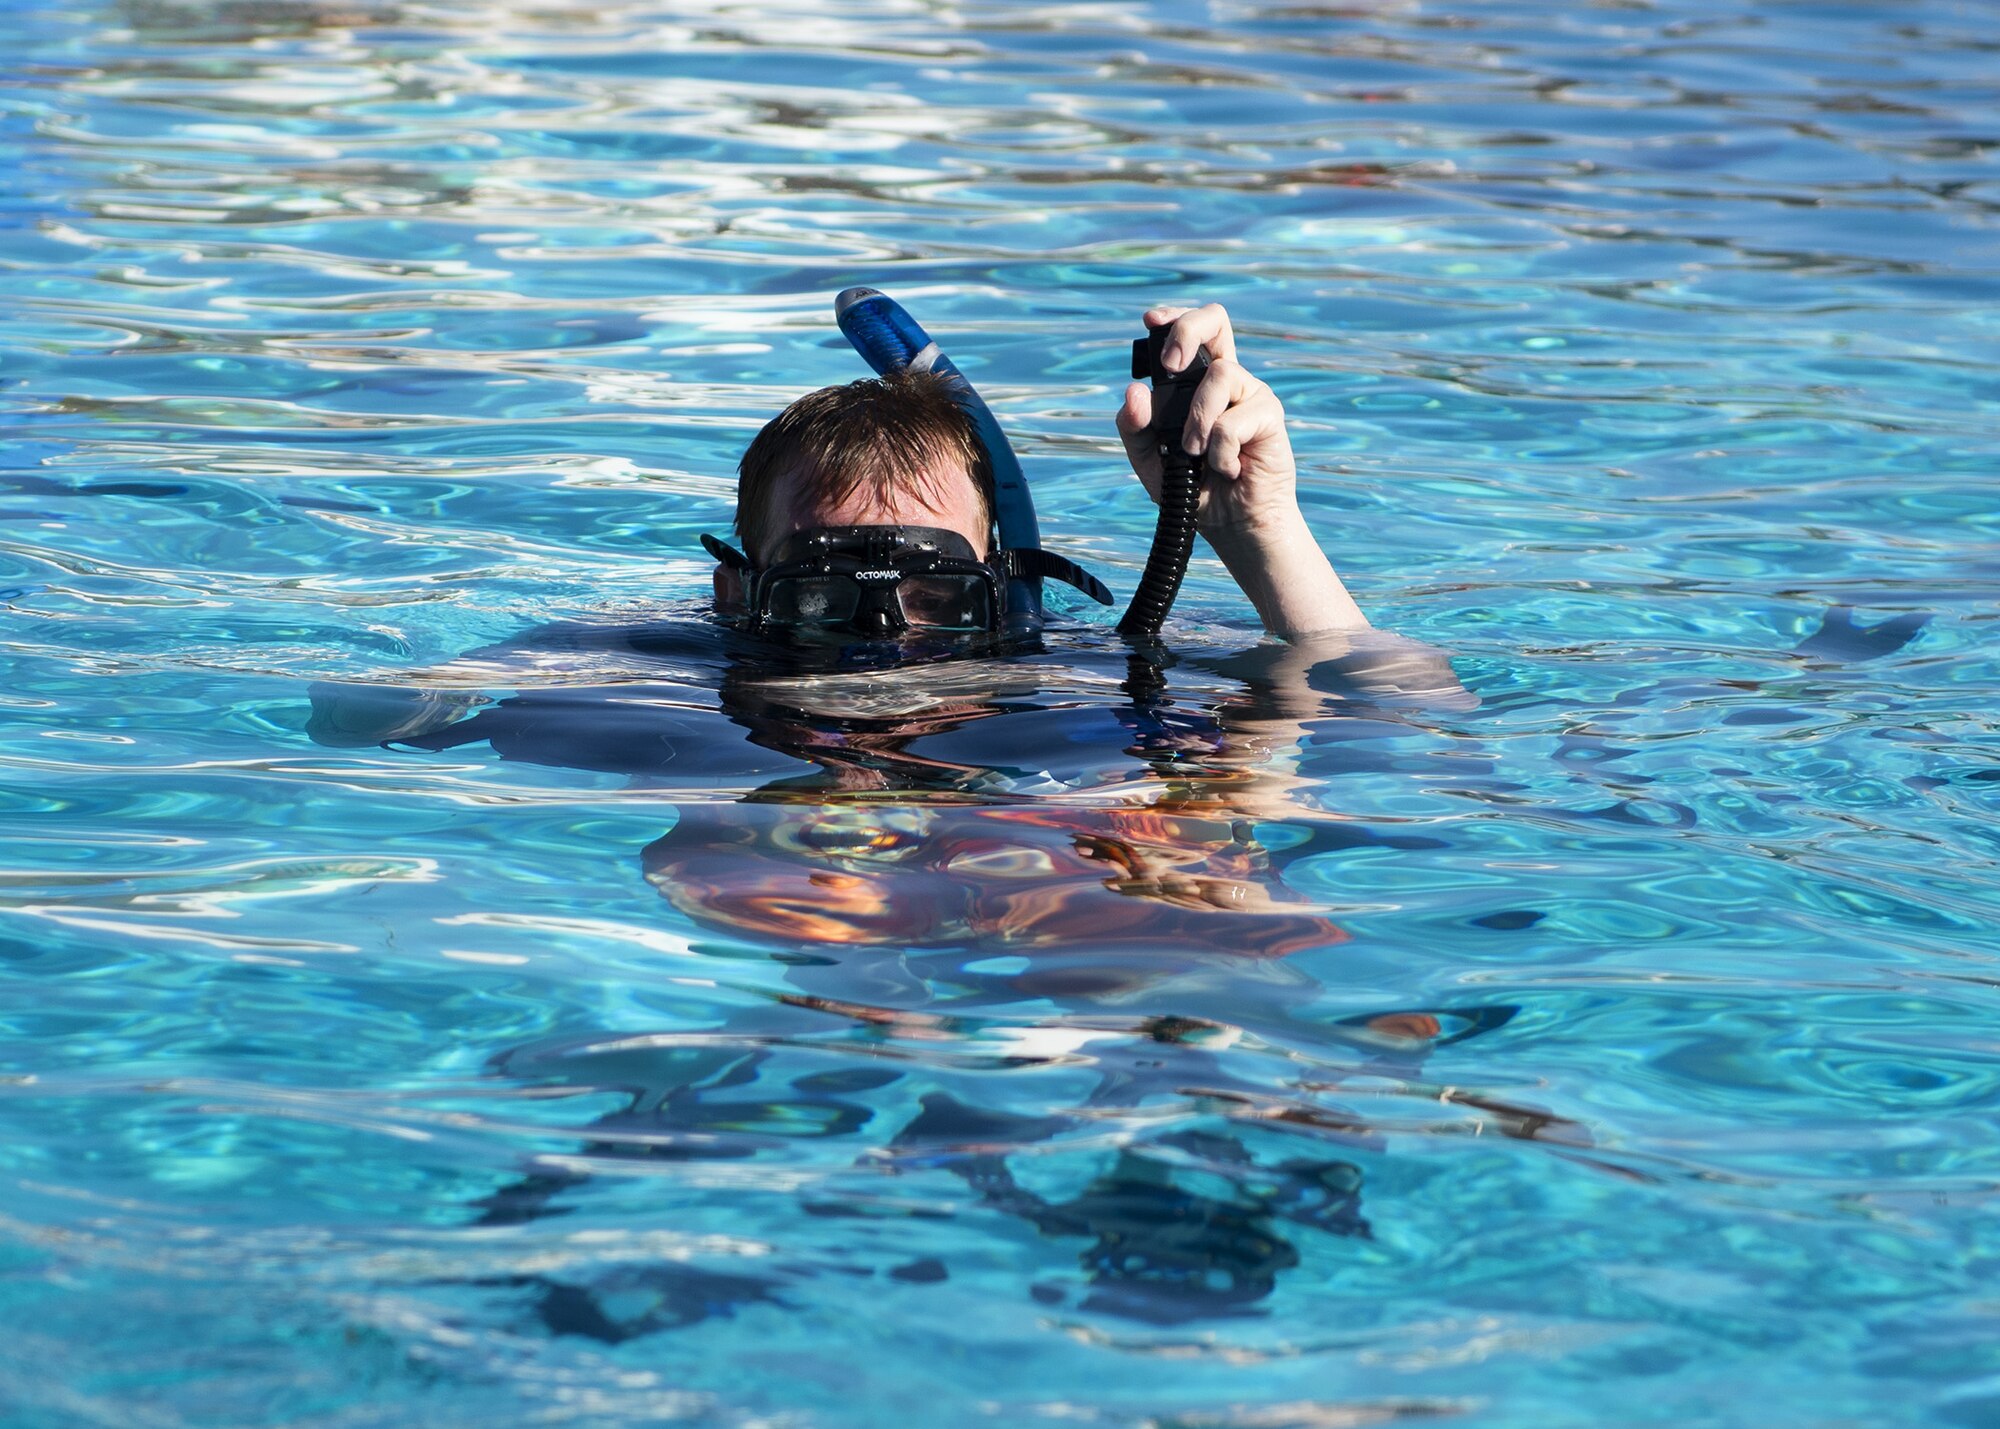 A scuba student empties the air out of his buoyancy compensator during a scuba diving class June 8, 2019, at Luke Air Force Base, Ariz.